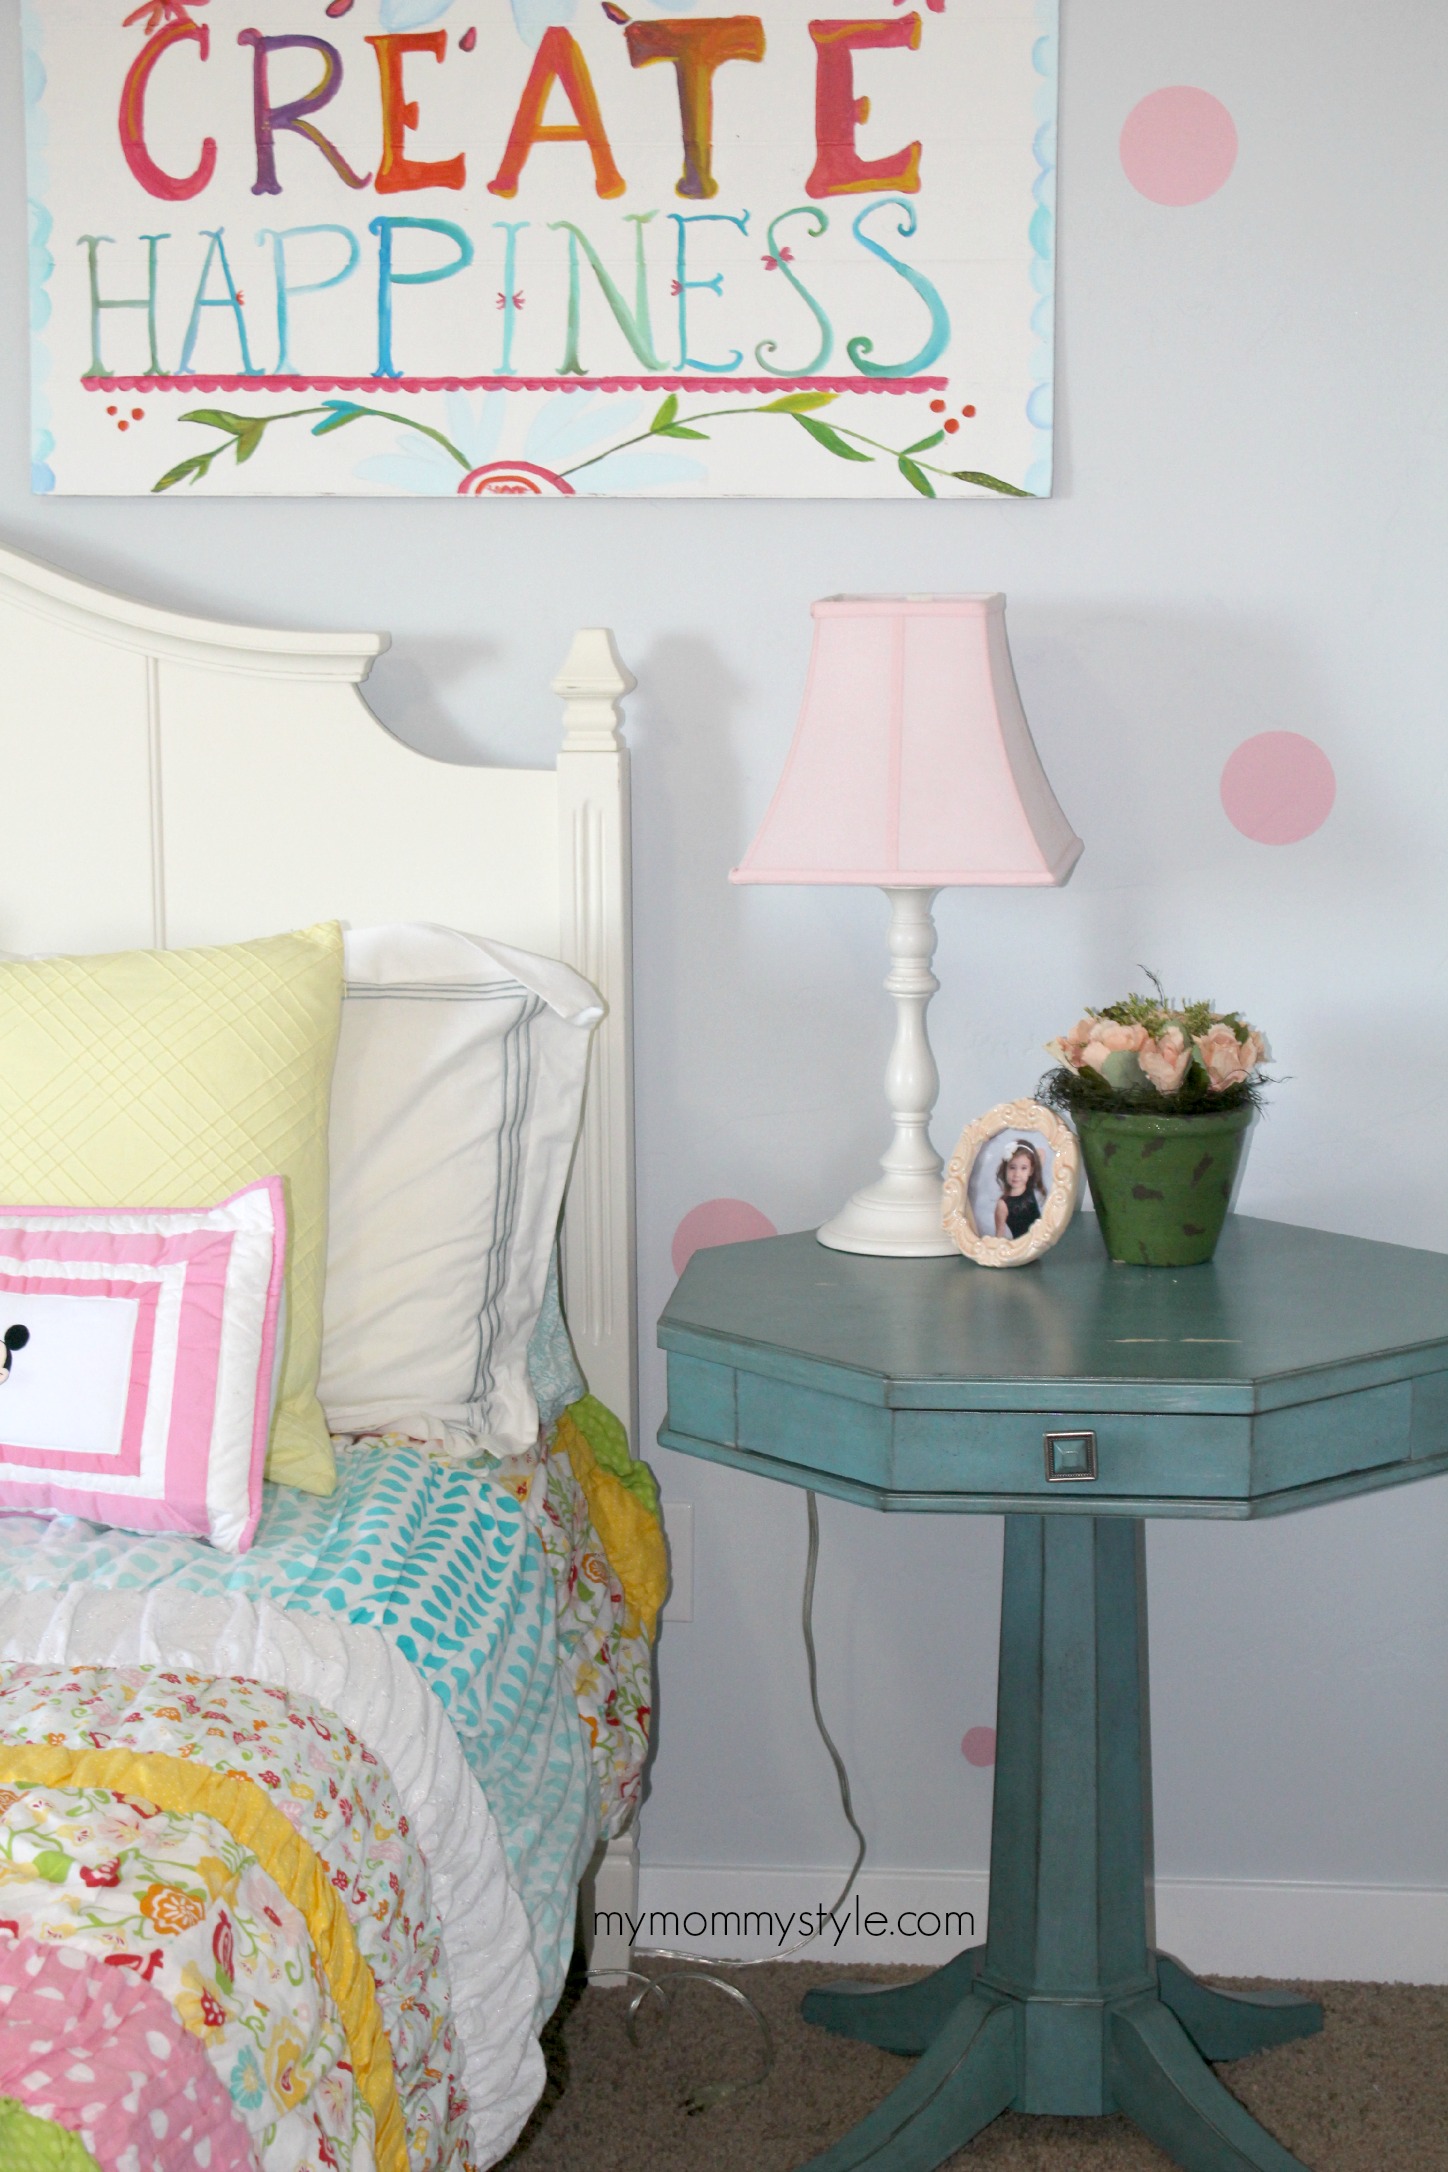 little girls room, create happiness, mymommmystyle.com